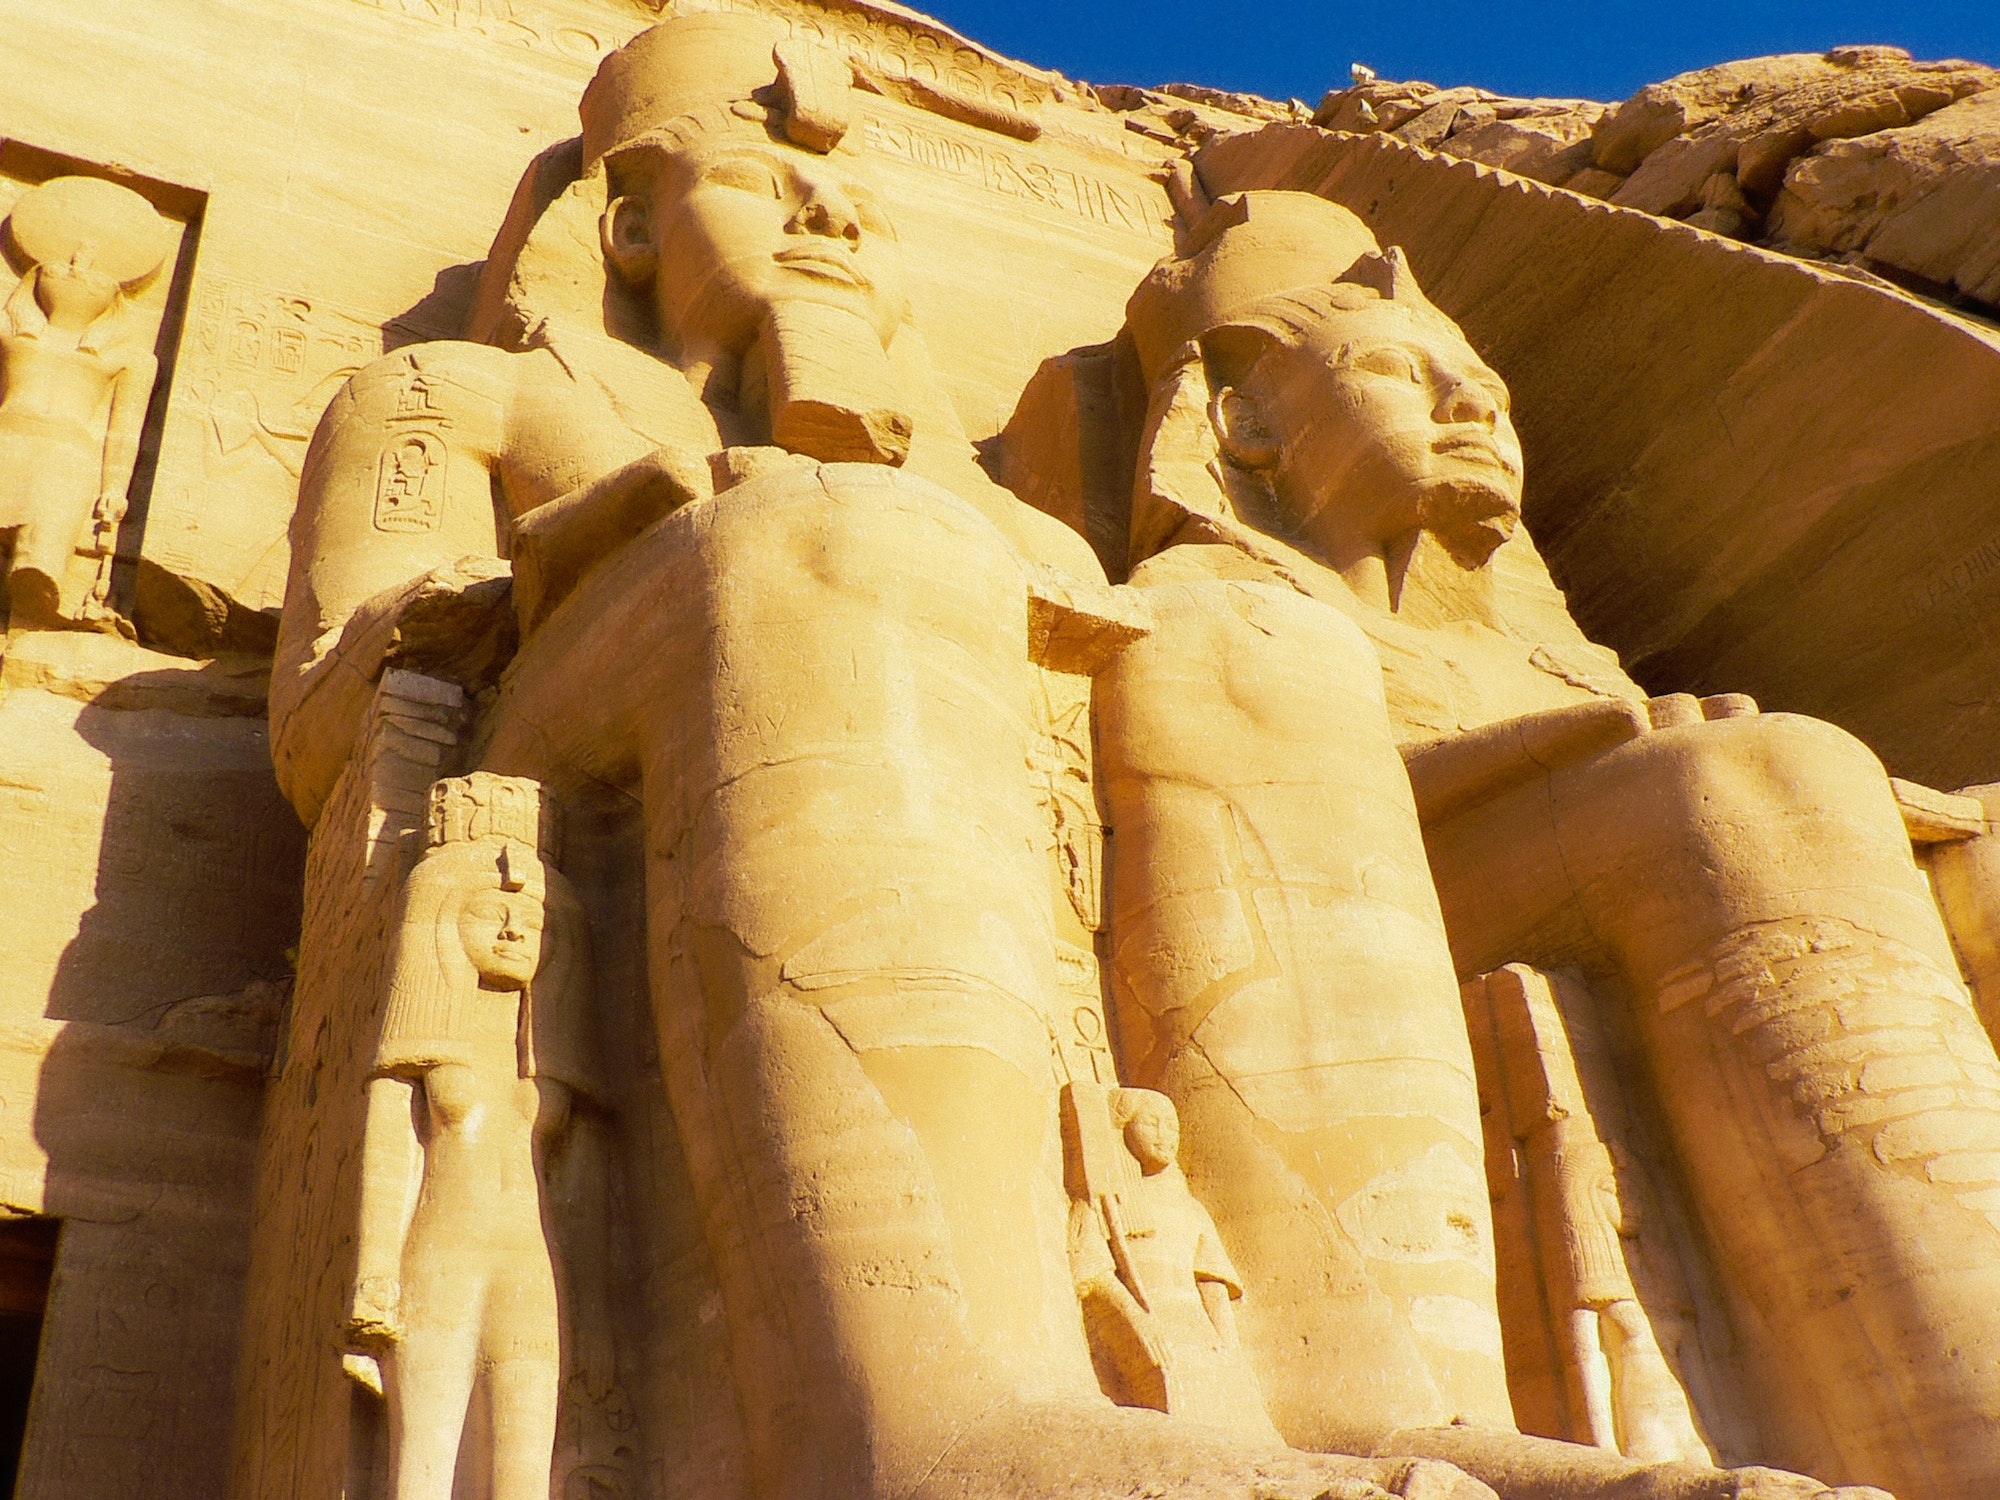 Sculptures of Abu Simbel Temples Abu in Egypt under the clear sky